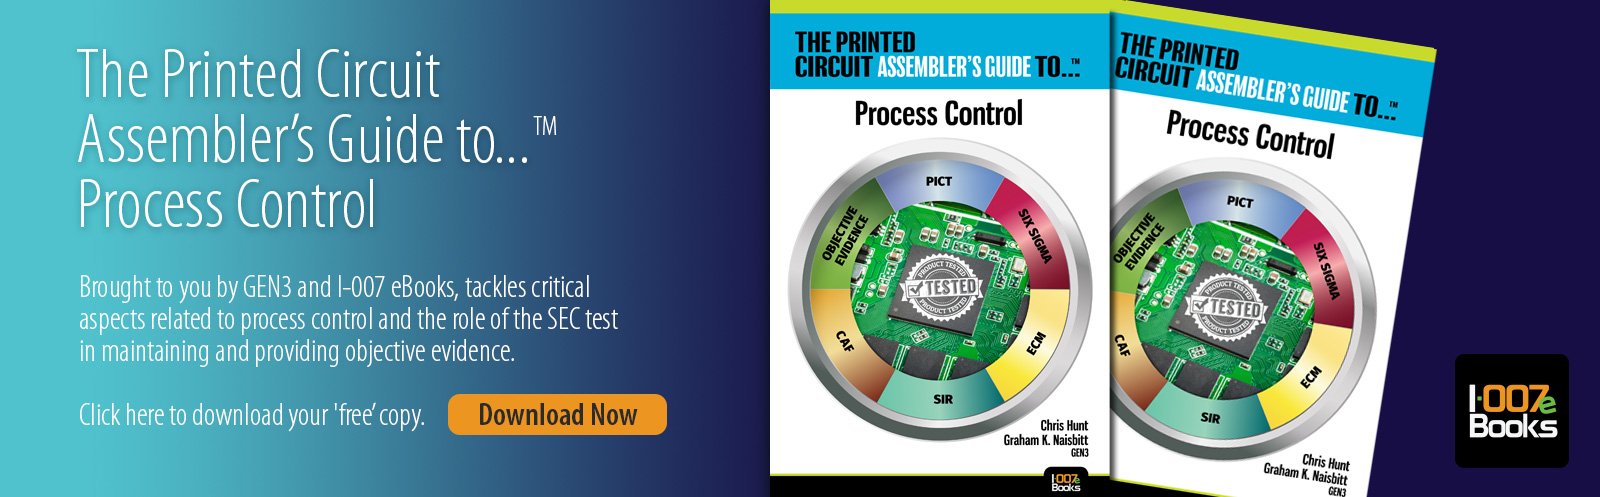 The Printed Circuit Assembler's Guide to Process Control